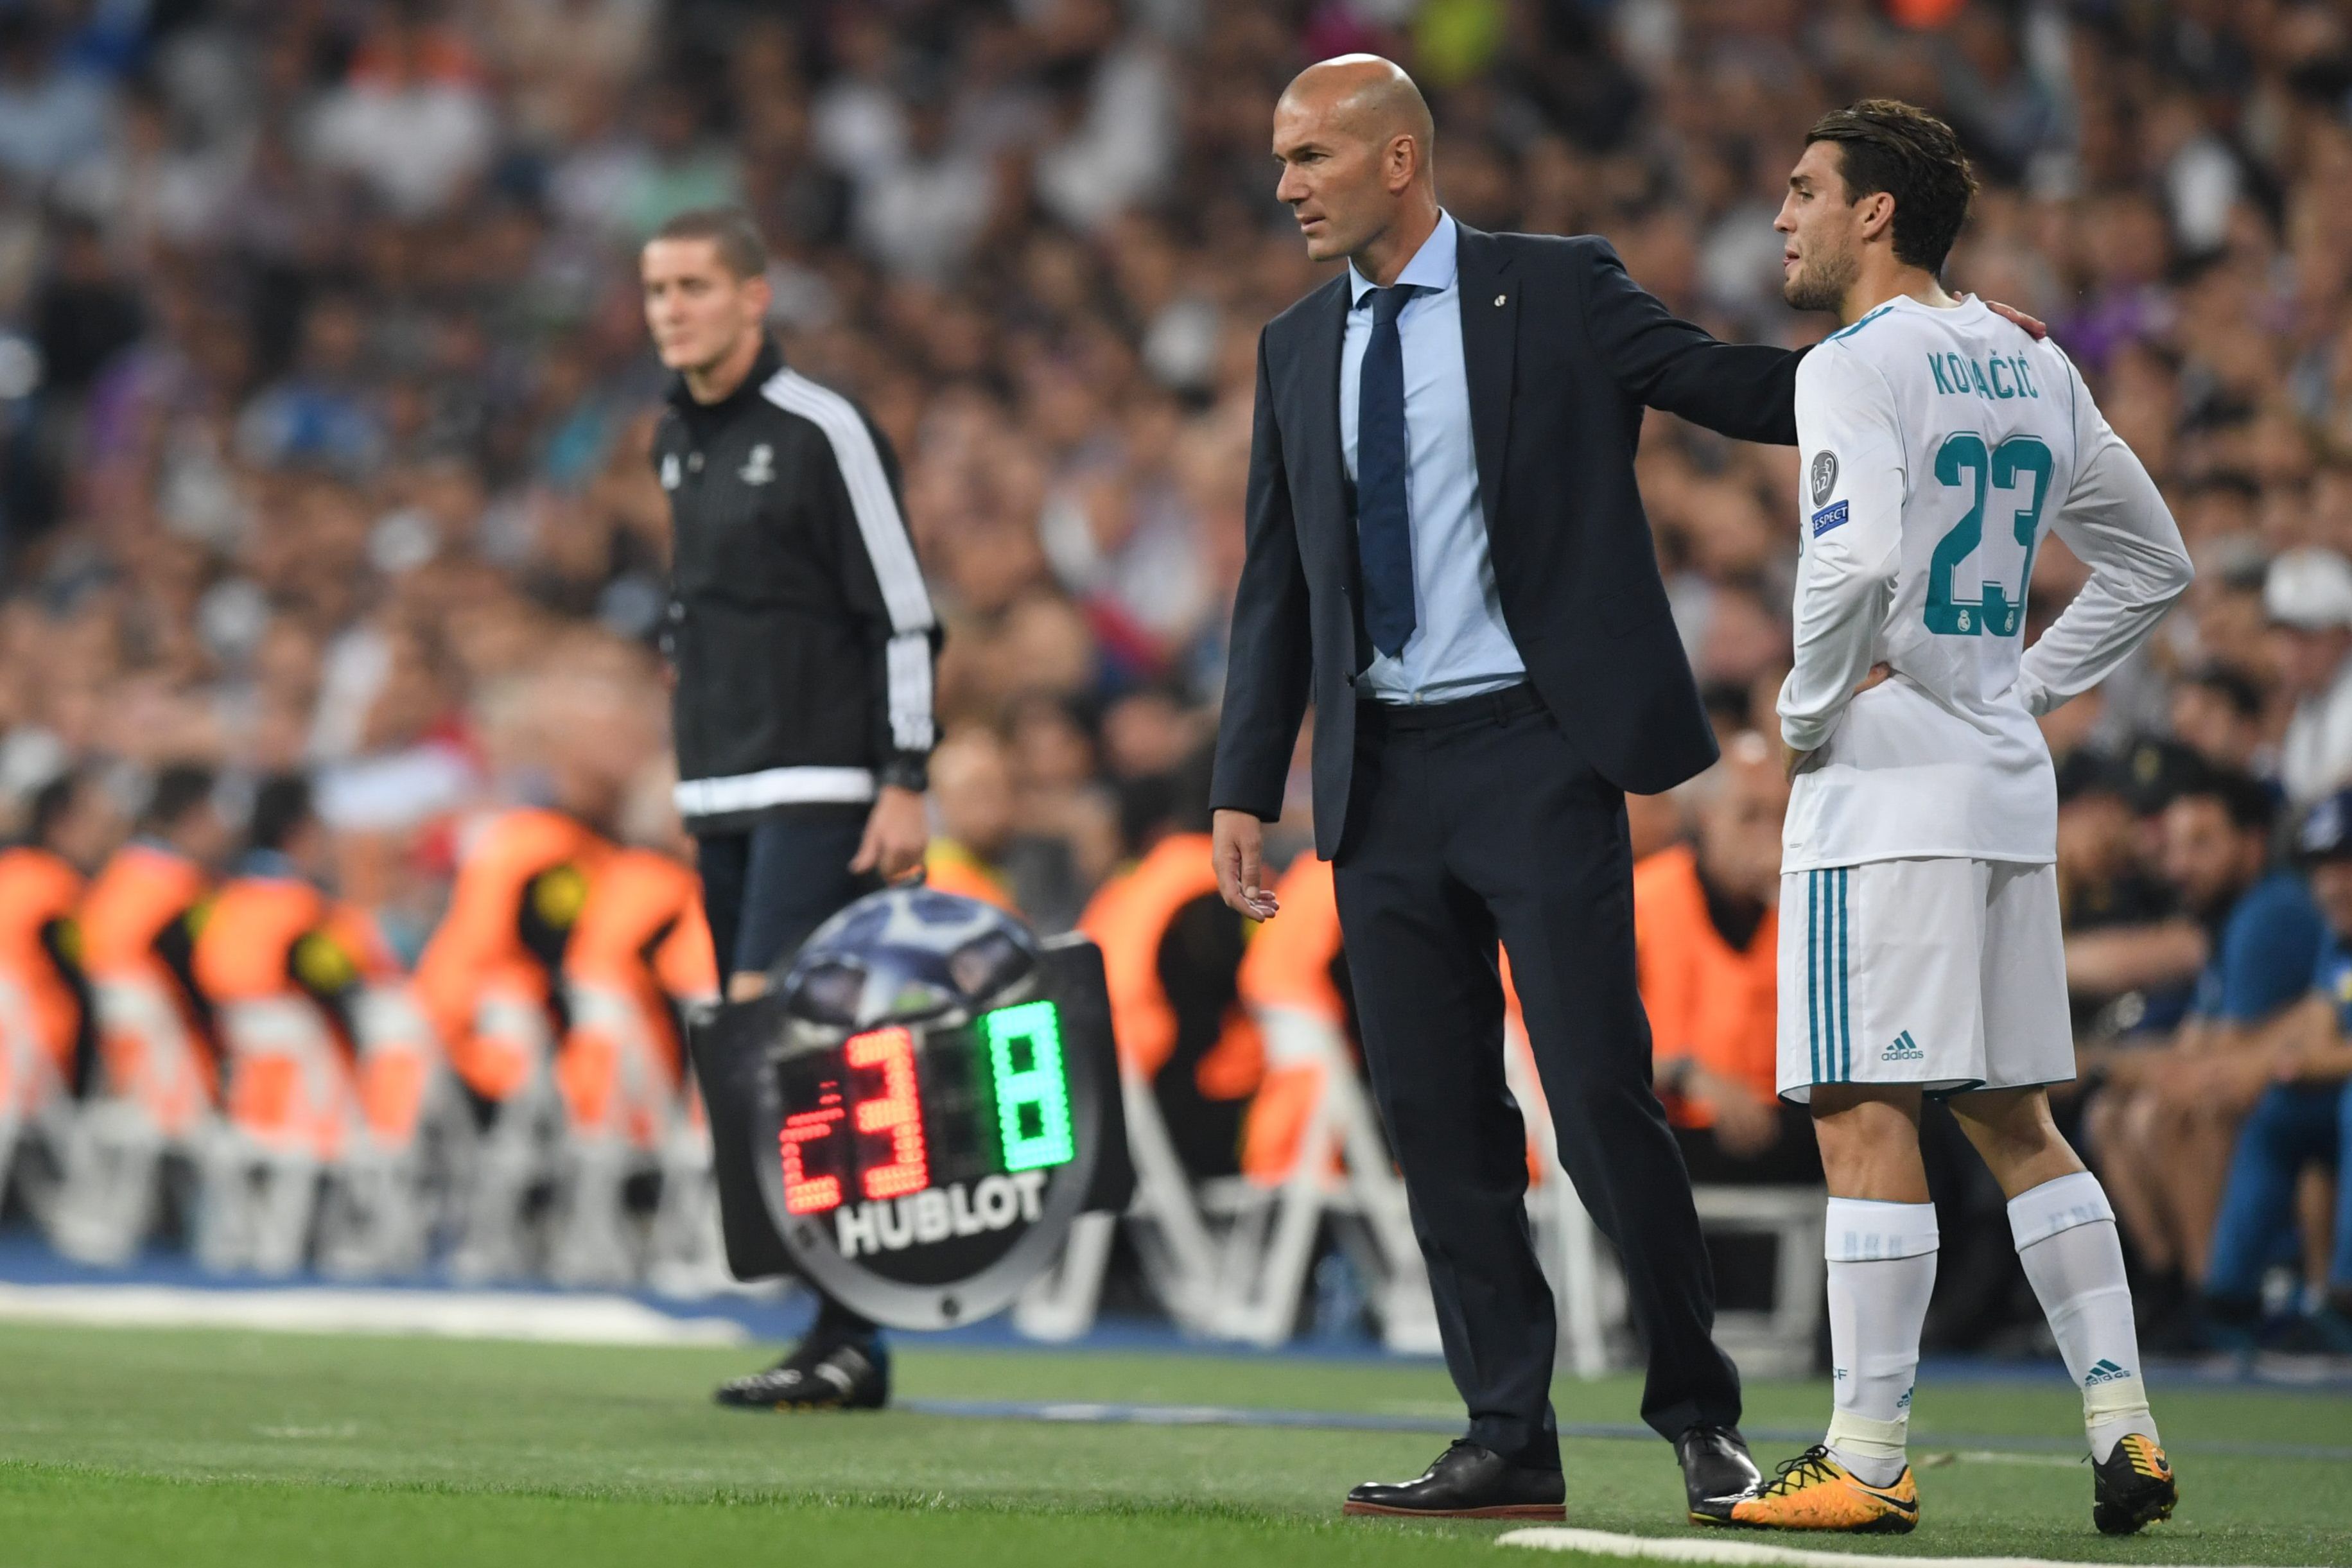 Real Madrid's coach from France Zinedine Zidane (C) stands past Real Madrid's midfielder from Croatia Mateo Kovacic during the UEFA Champions League football match Real Madrid CF vs APOEL FC at the Santiago Bernabeu stadium in Madrid on September 13, 2017. / AFP PHOTO / GABRIEL BOUYS        (Photo credit should read GABRIEL BOUYS/AFP/Getty Images)